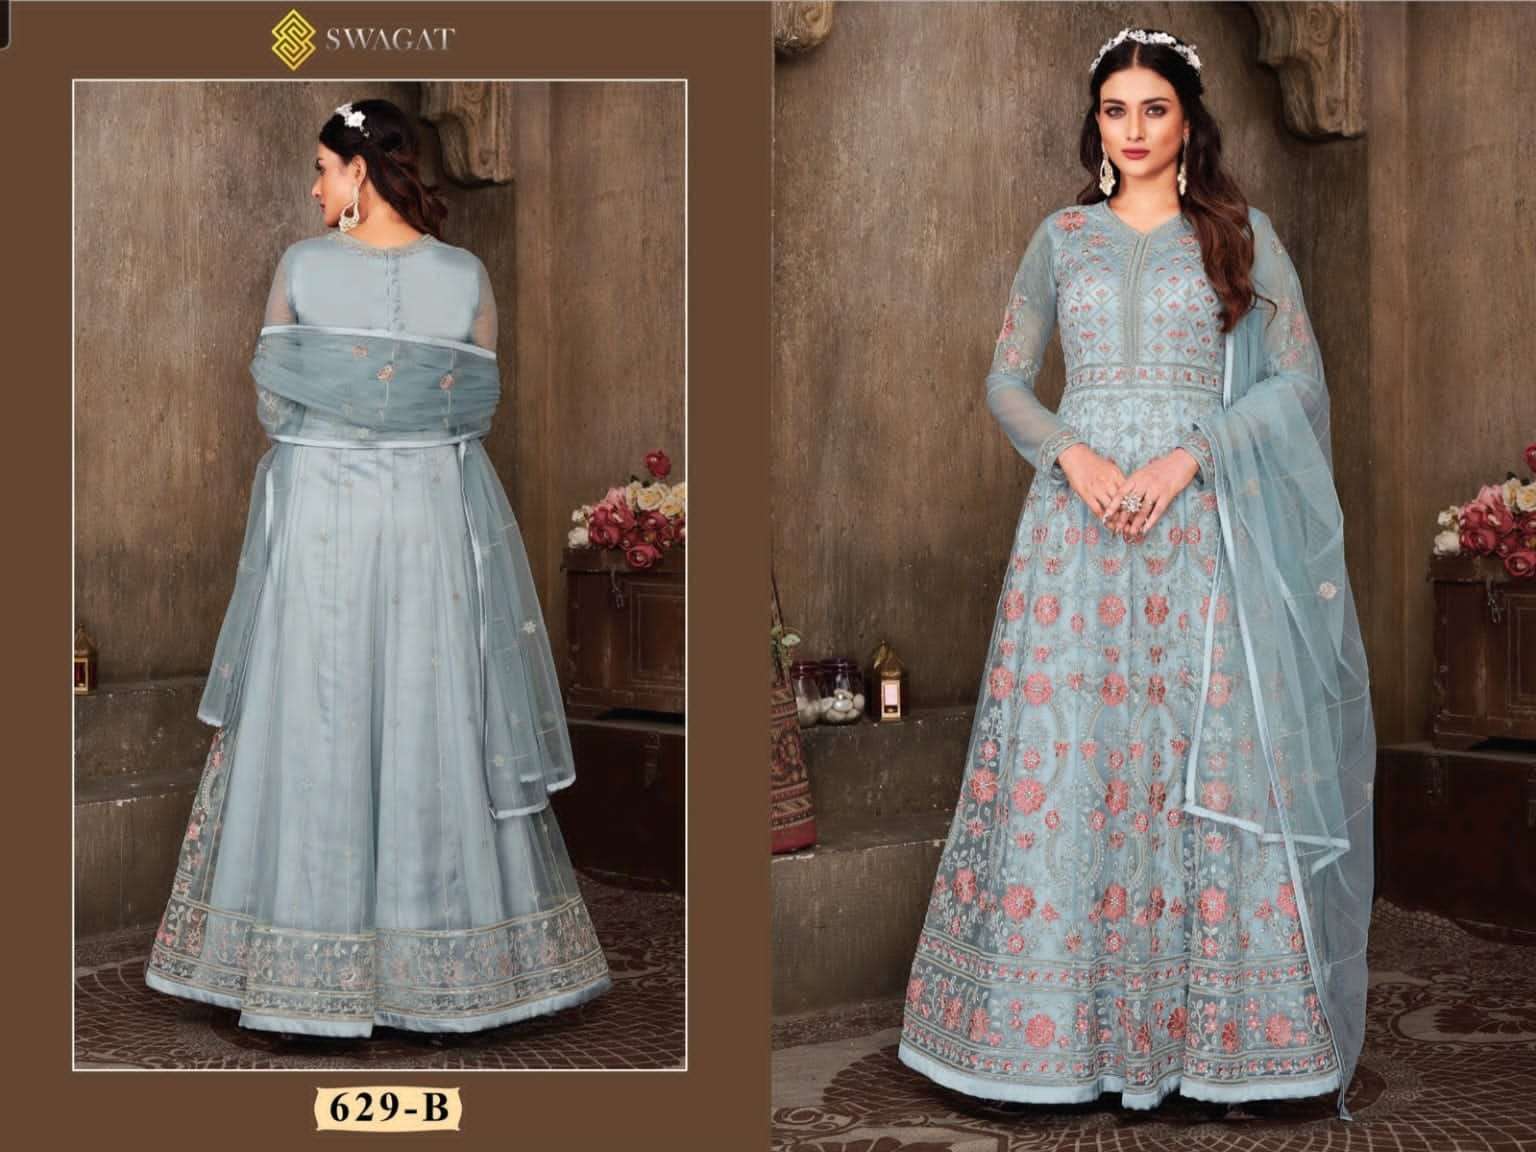 Swagat 629 Colours By Swagat 629-A To 629-D Series Beautiful Stylish Anarkali Suits Fancy Colorful Casual Wear & Ethnic Wear & Ready To Wear Net Dresses At Wholesale Price